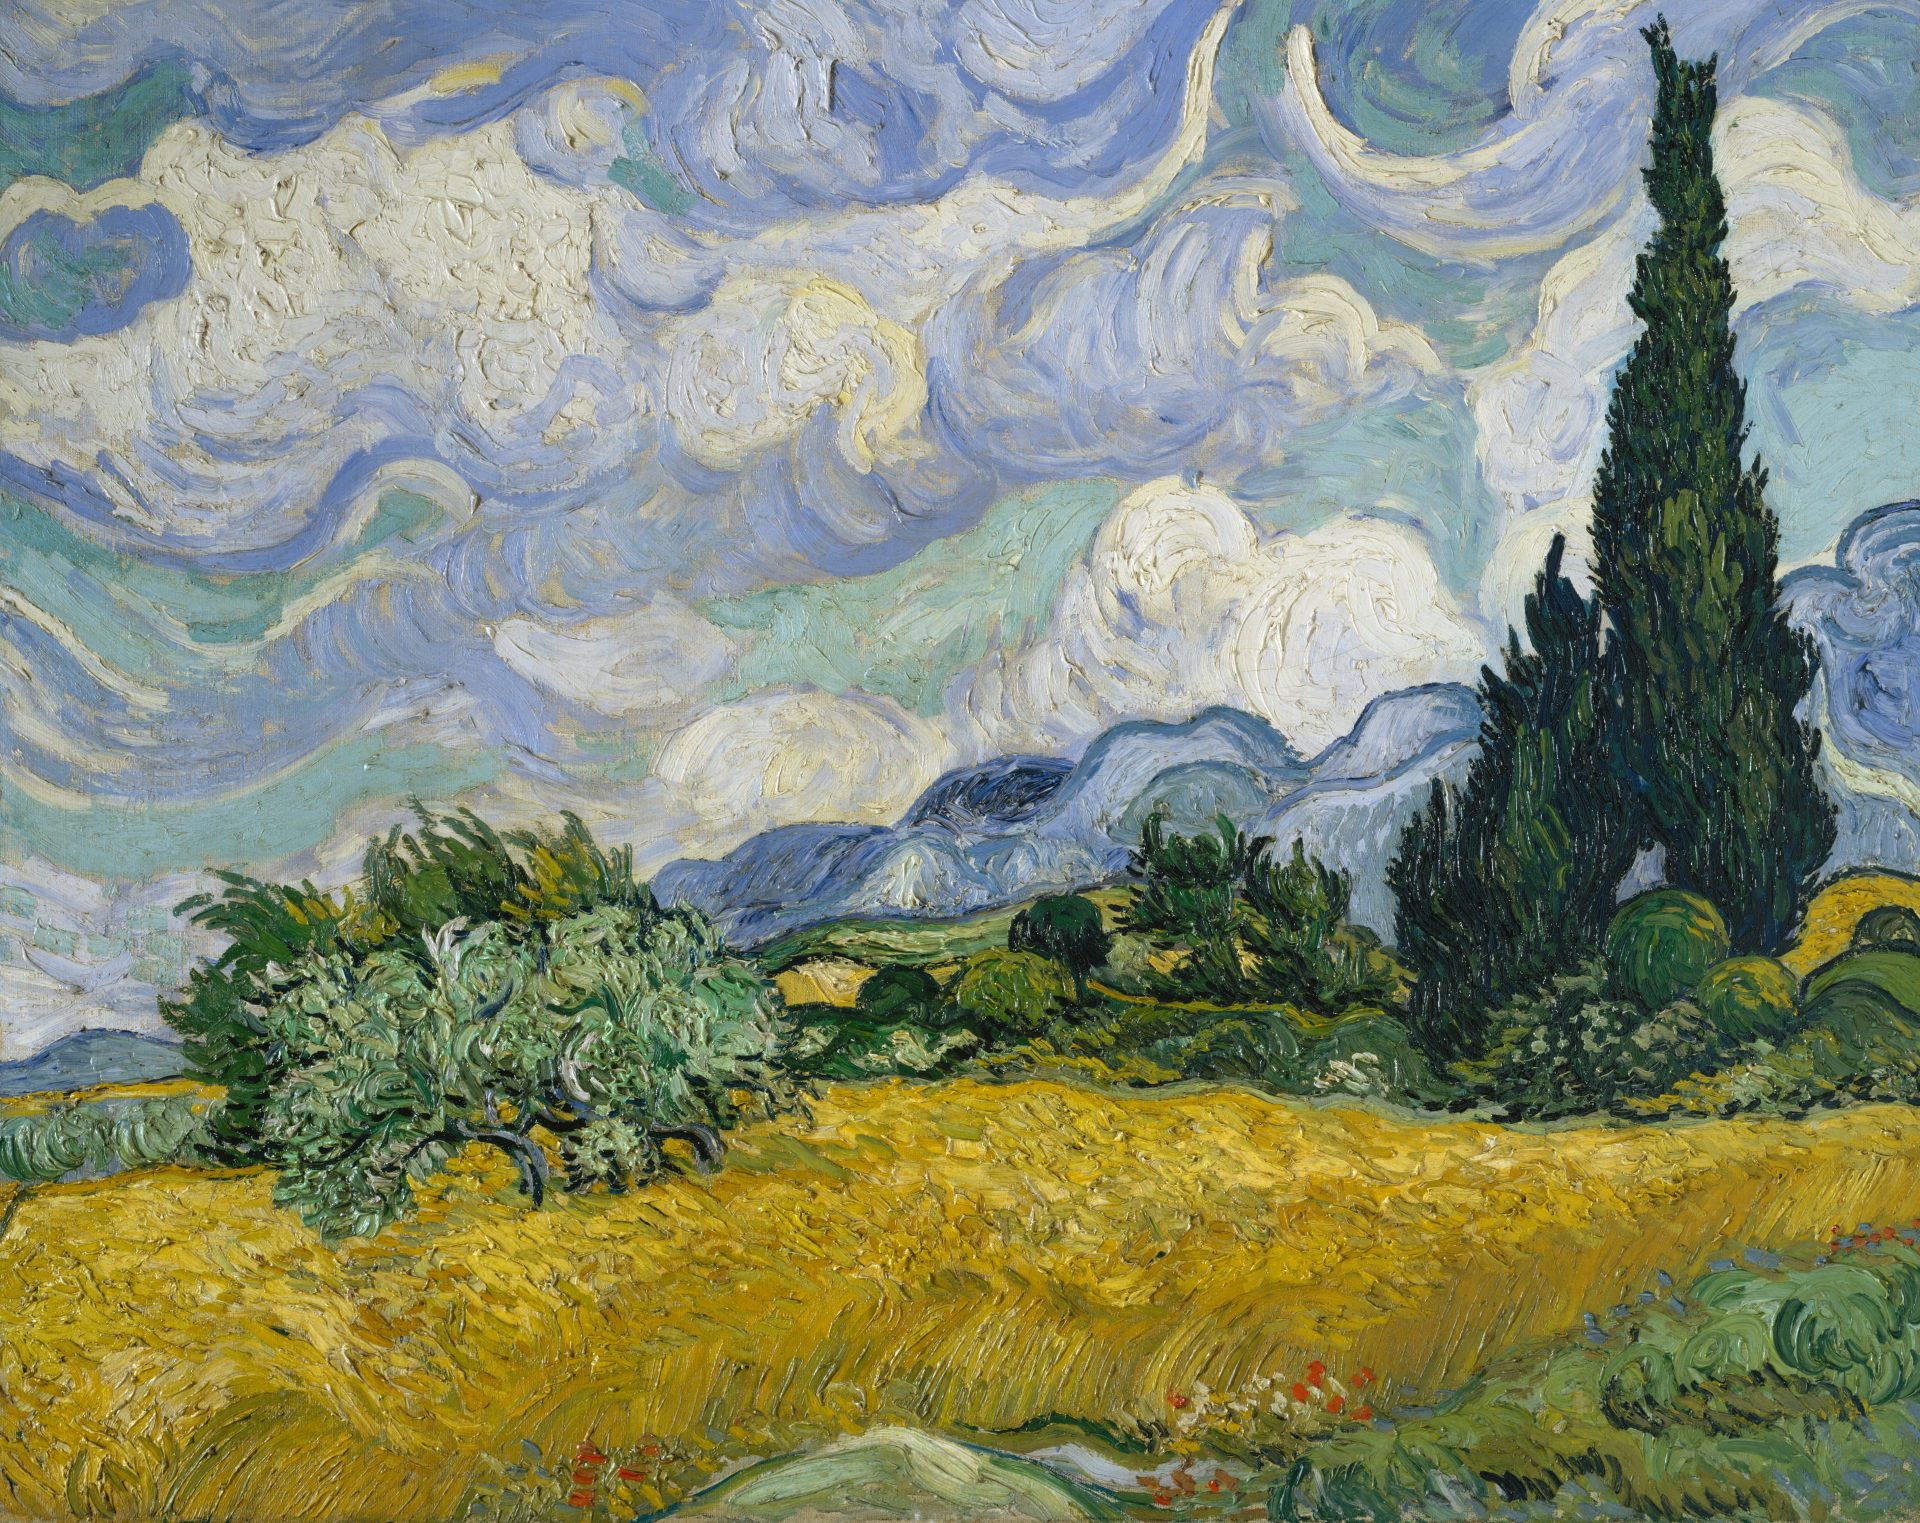 Van Goghs Love Of Cypress Trees Symbols Of Eternity And Life Cycles Will Be The Focus Of A 6979